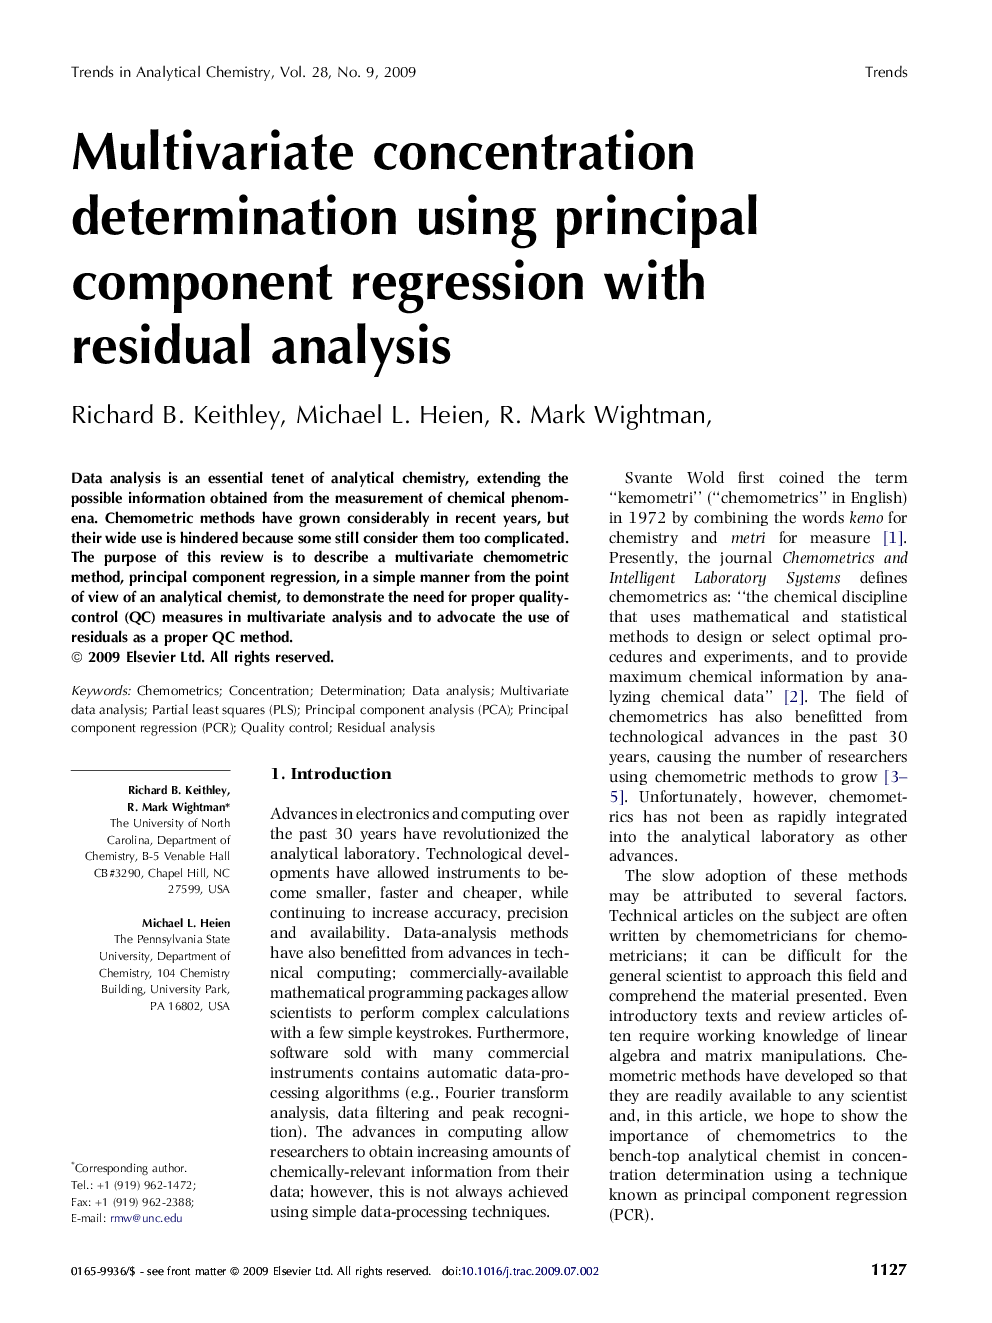 Multivariate concentration determination using principal component regression with residual analysis